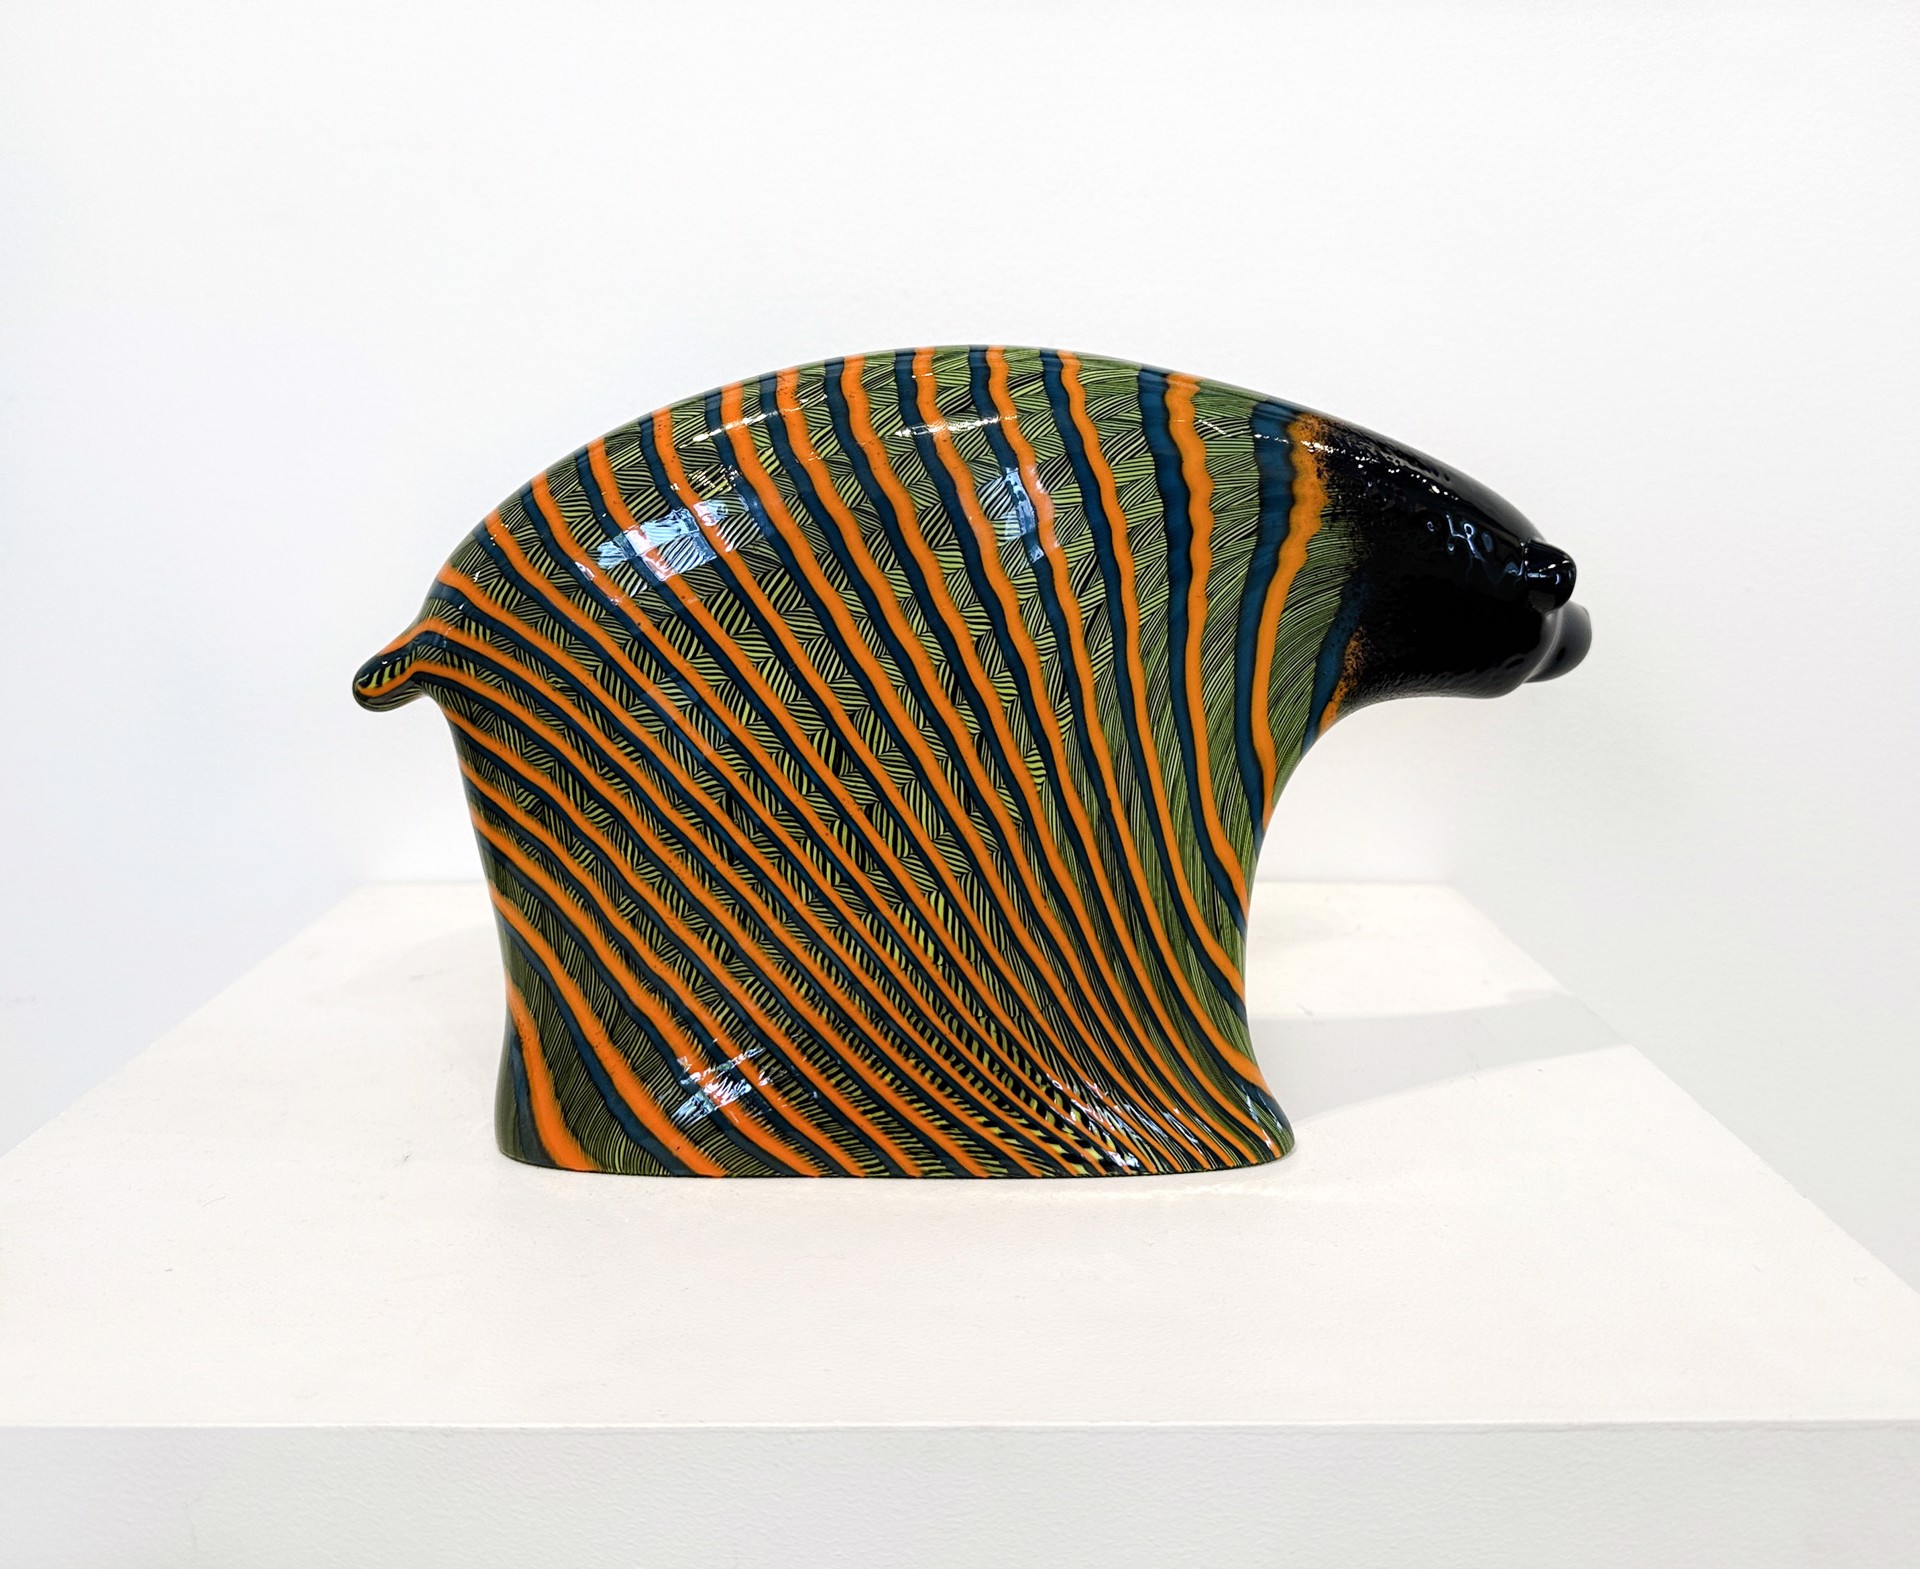 Original Hand Blown Glass Sculpture By Dan Friday Featuring A Simplified Bear Form With Orange And Green Lightning Pattern Motif Over Deep Glossy Black